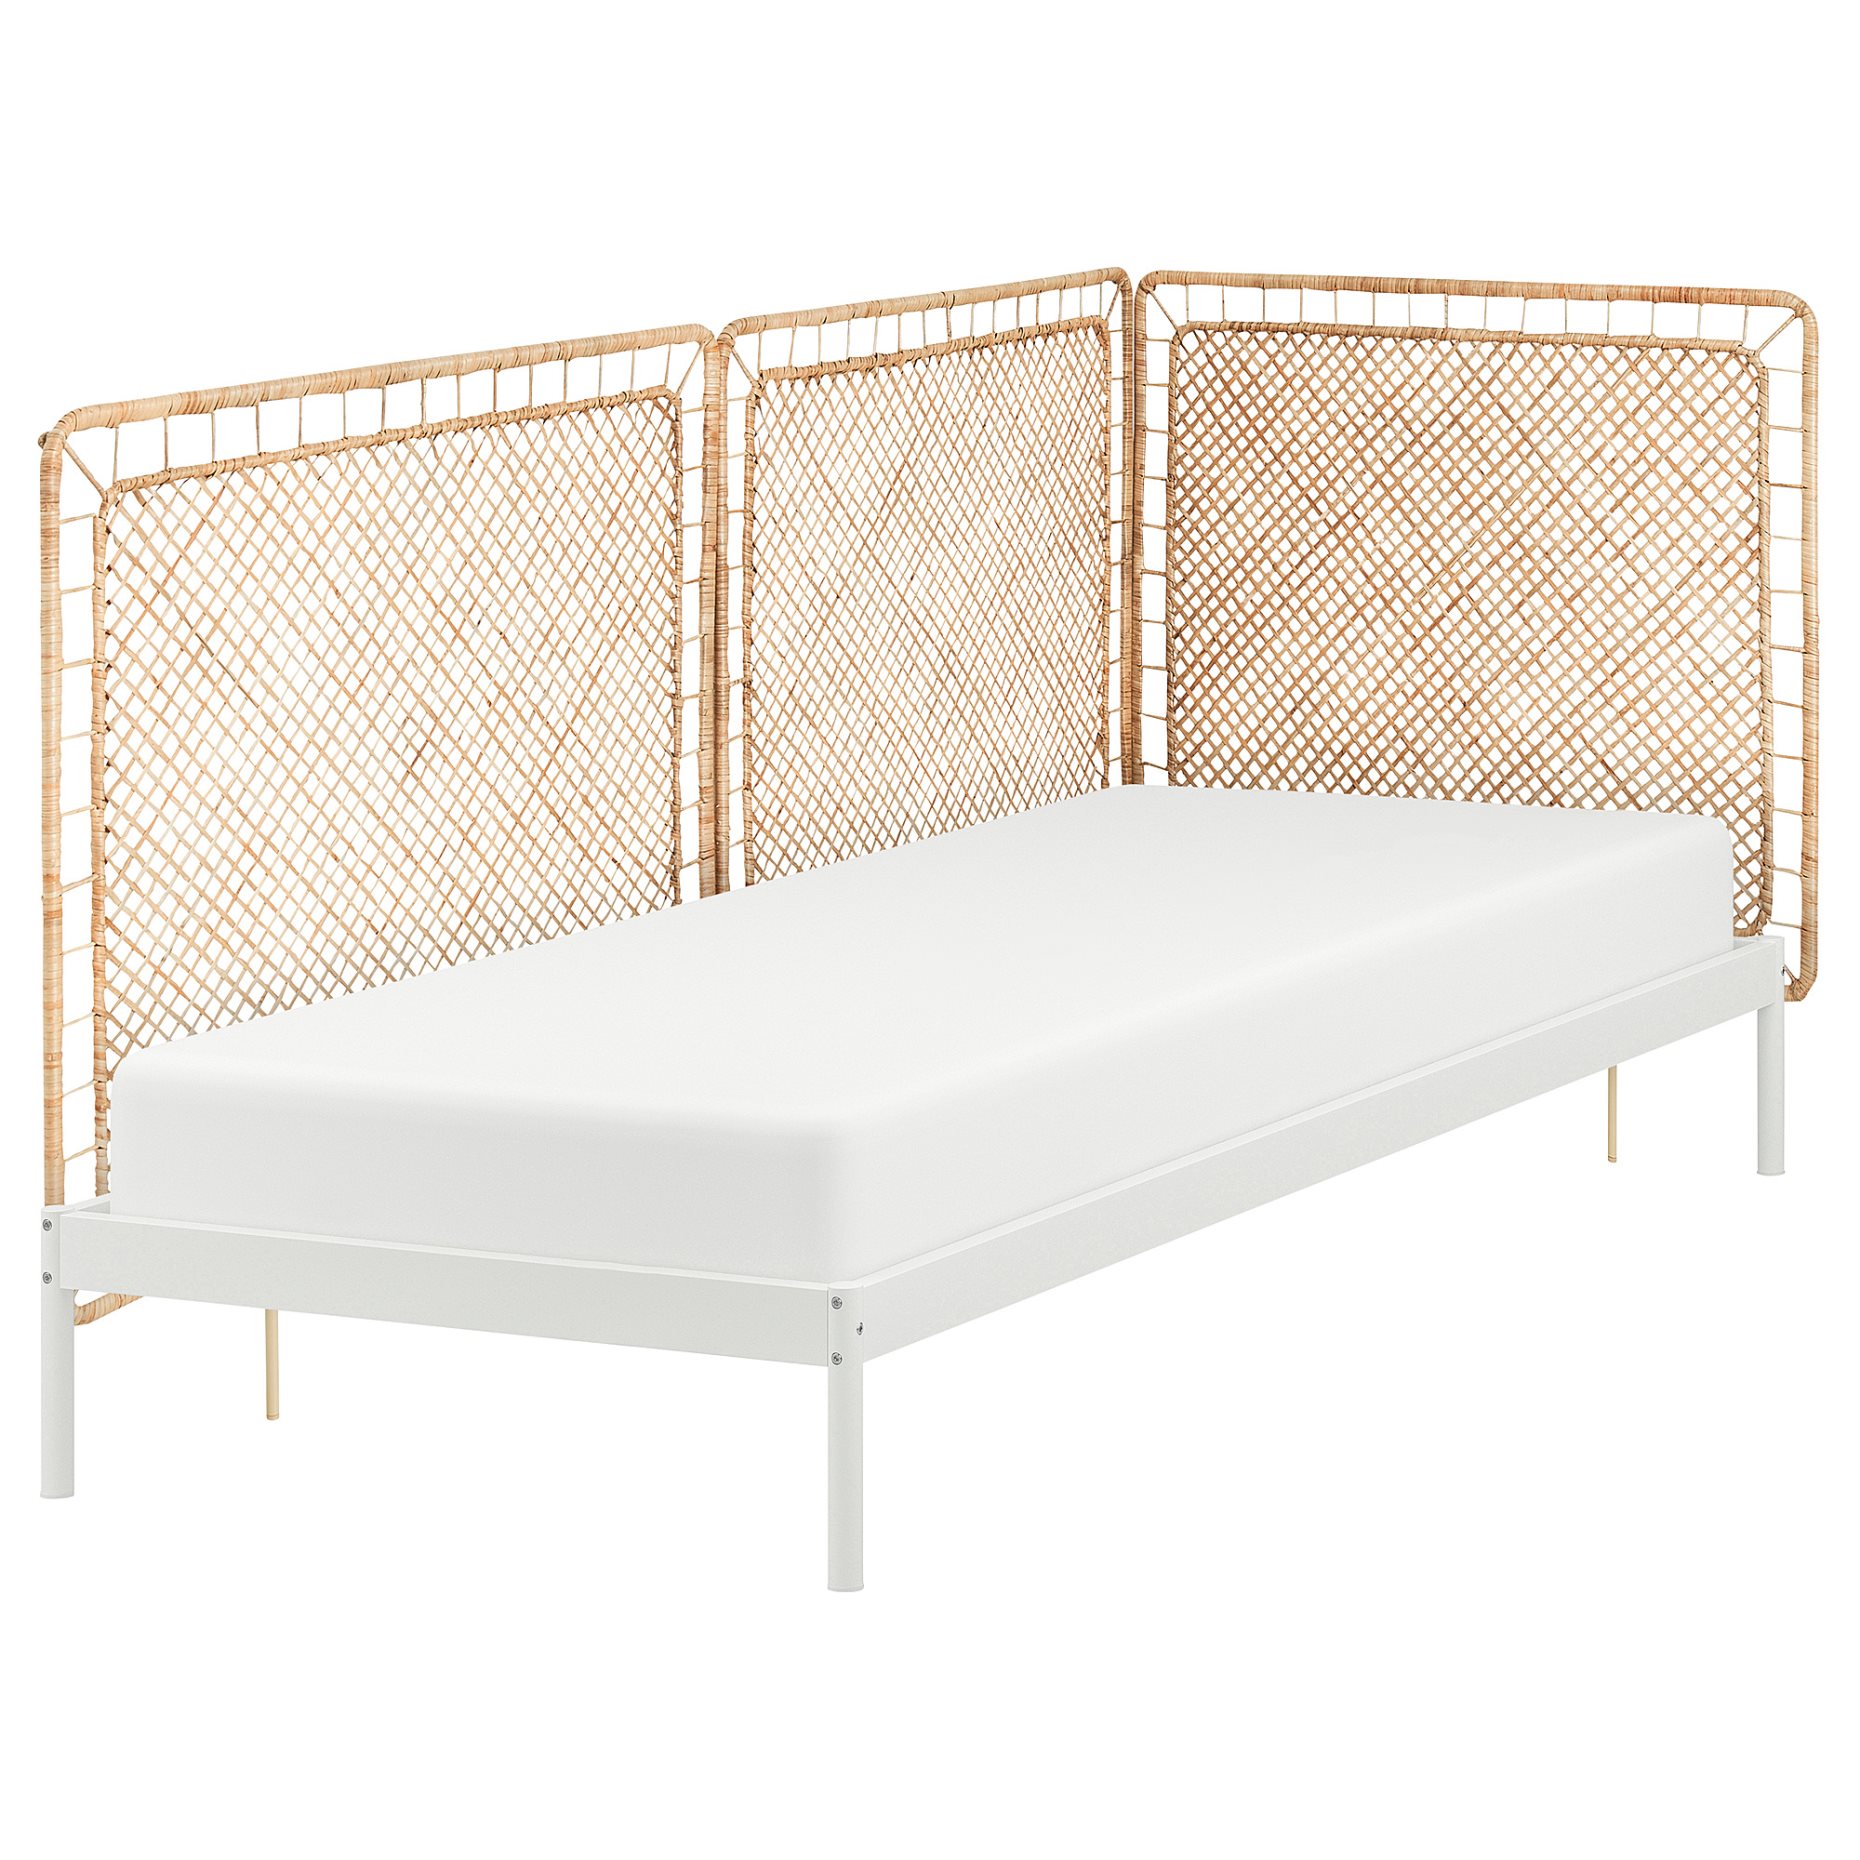 VEVELSTAD, bed frame with 3 headboards, 90x200 cm, 994.418.20